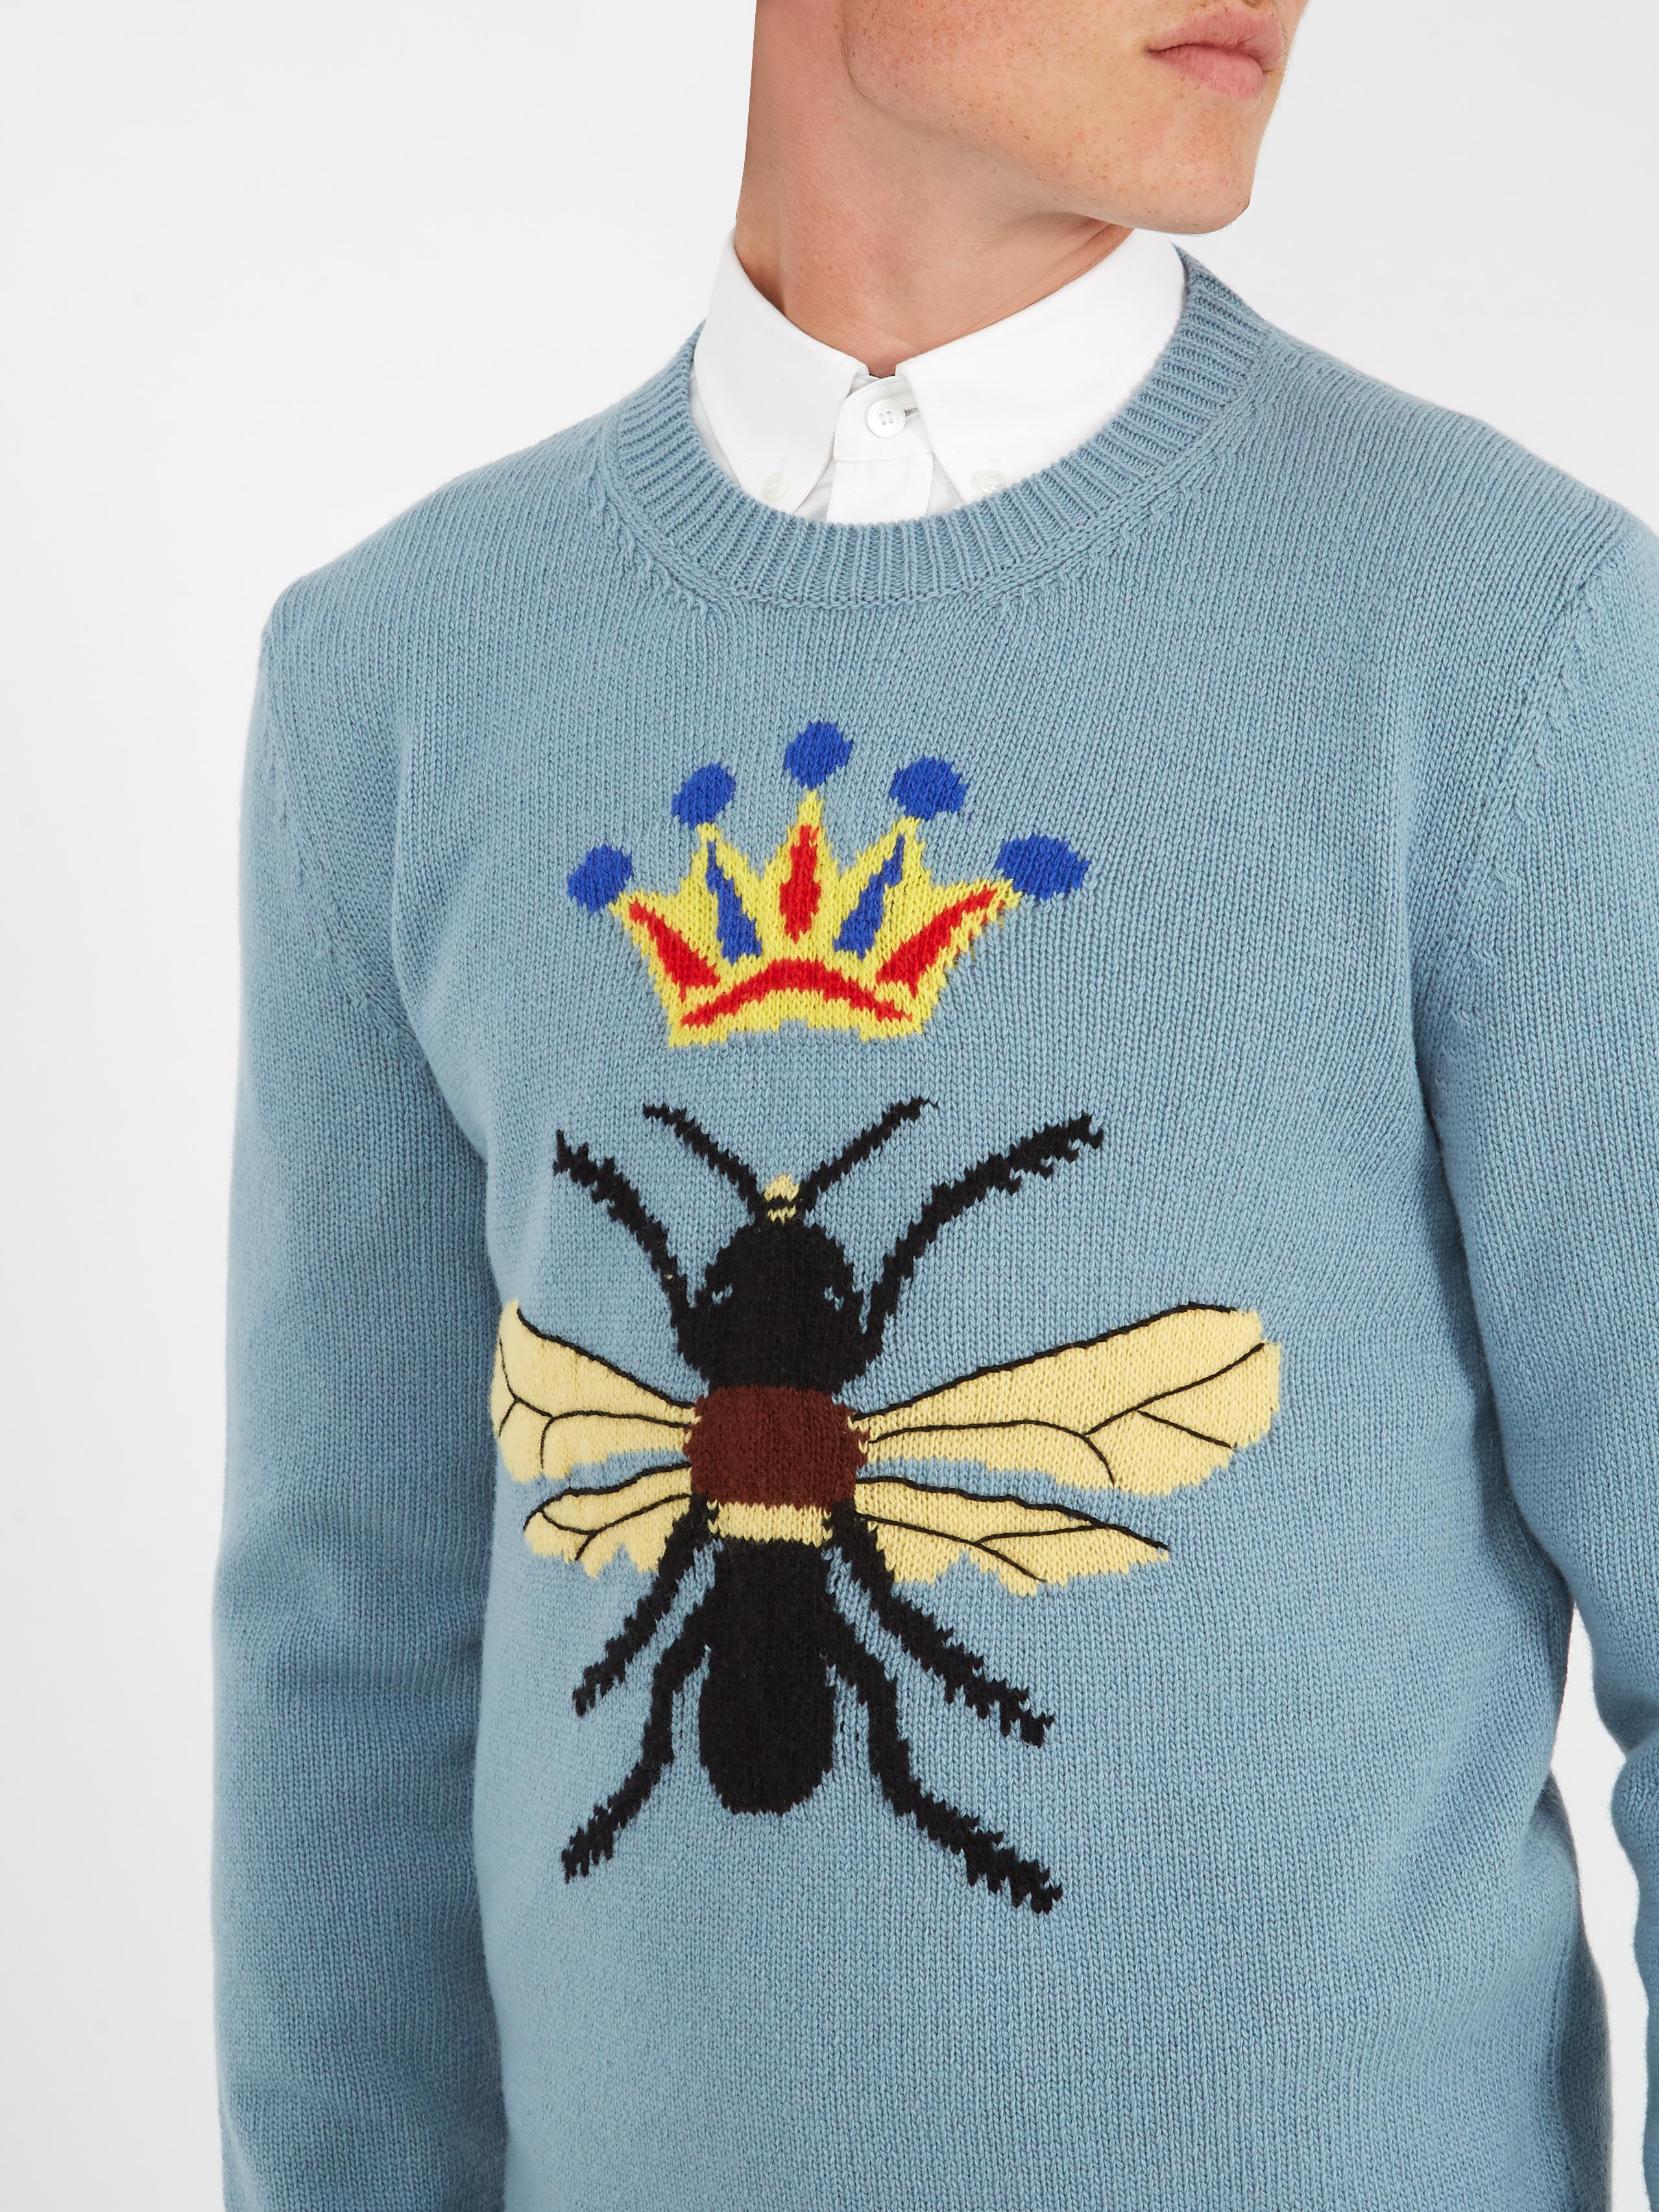 Gucci Bee And Crown-intarsia Sweater Blue for Men - Lyst